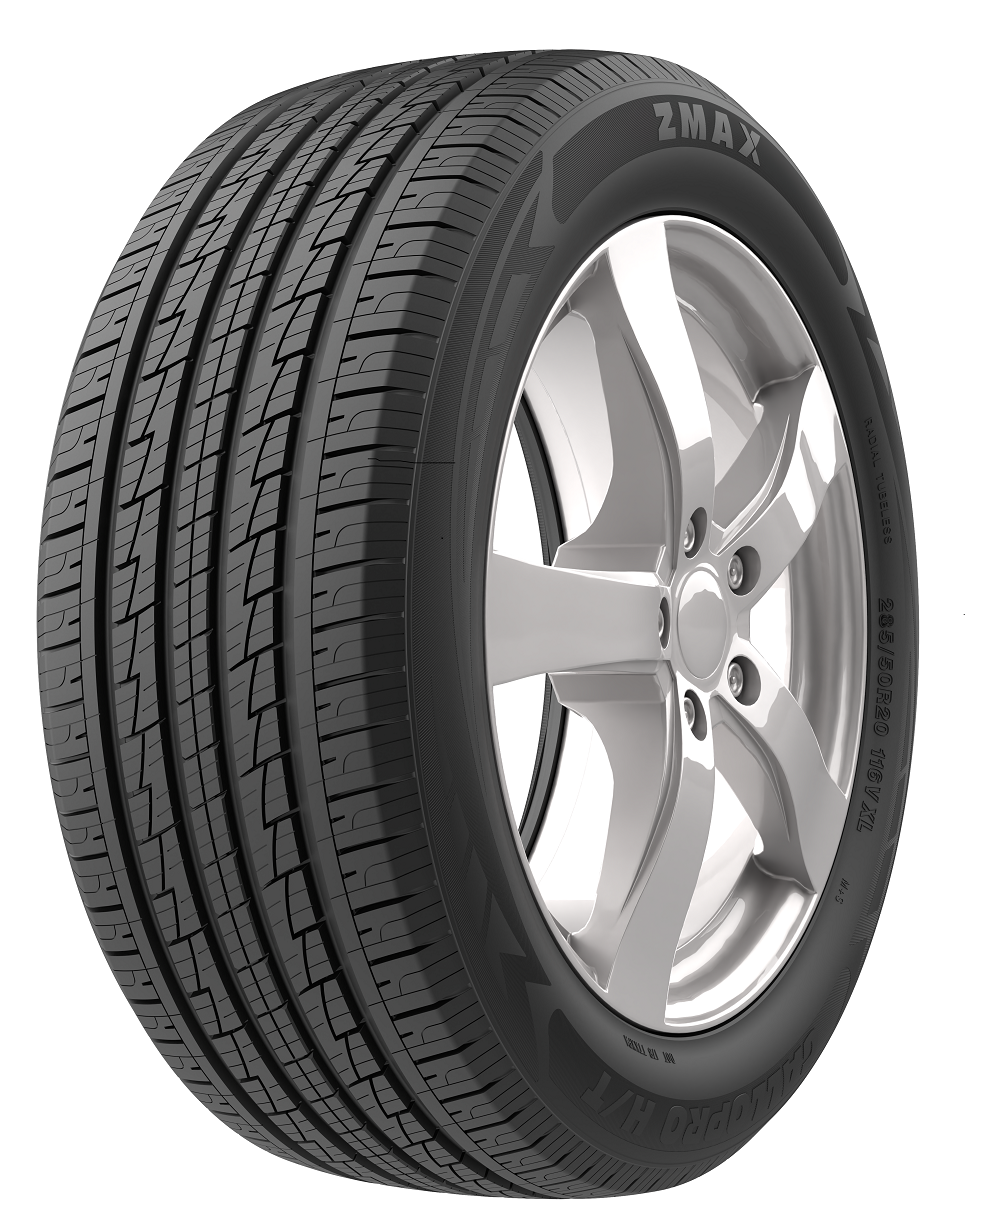 235/70 R16 106H ZMAX GALLOPRO H/T HT